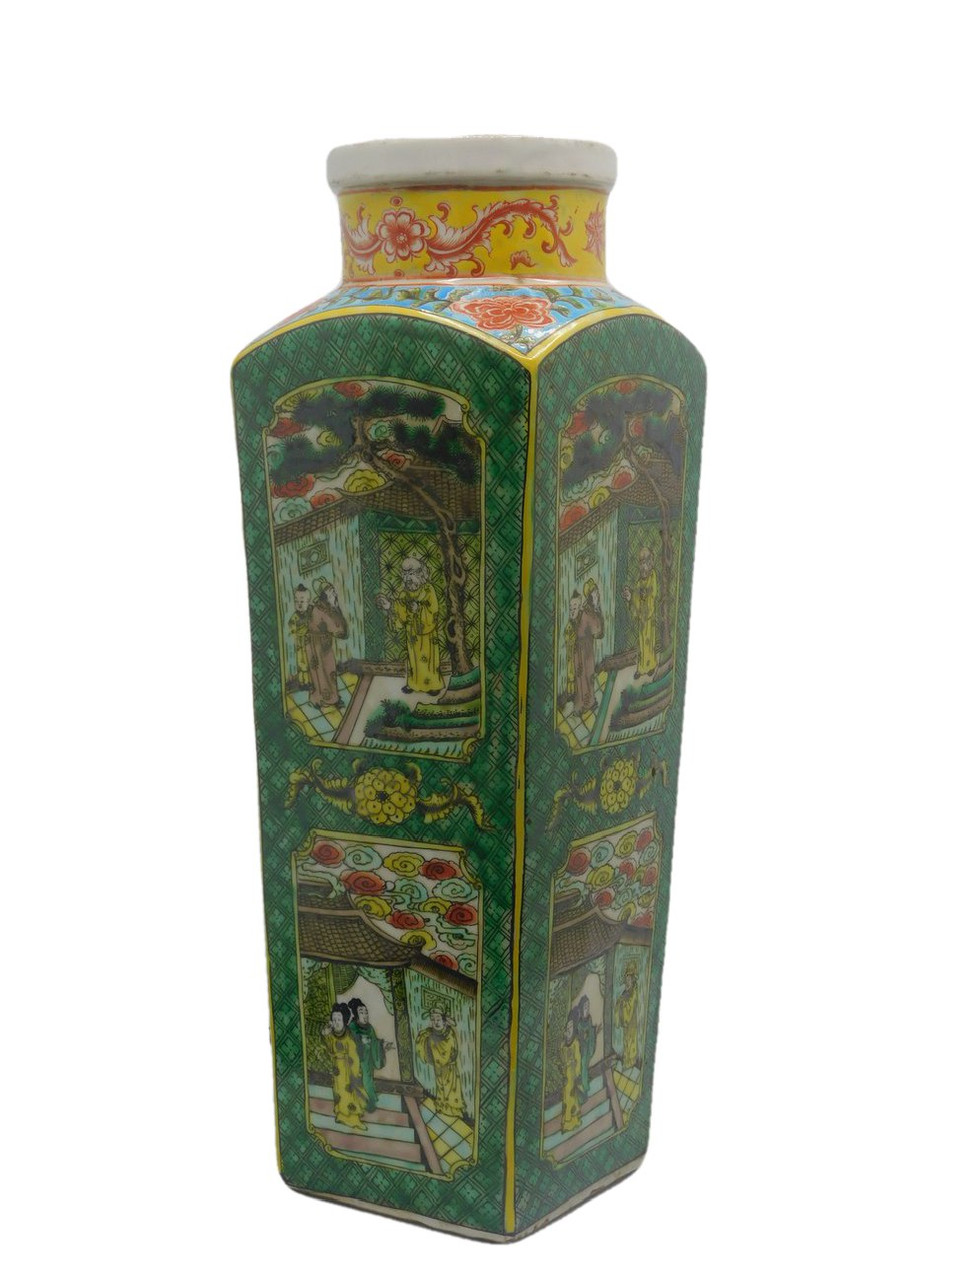 Oriental Furnishings Chinese Floral Square Porcelain Vase Gold Line with Lime Green and Coral. 